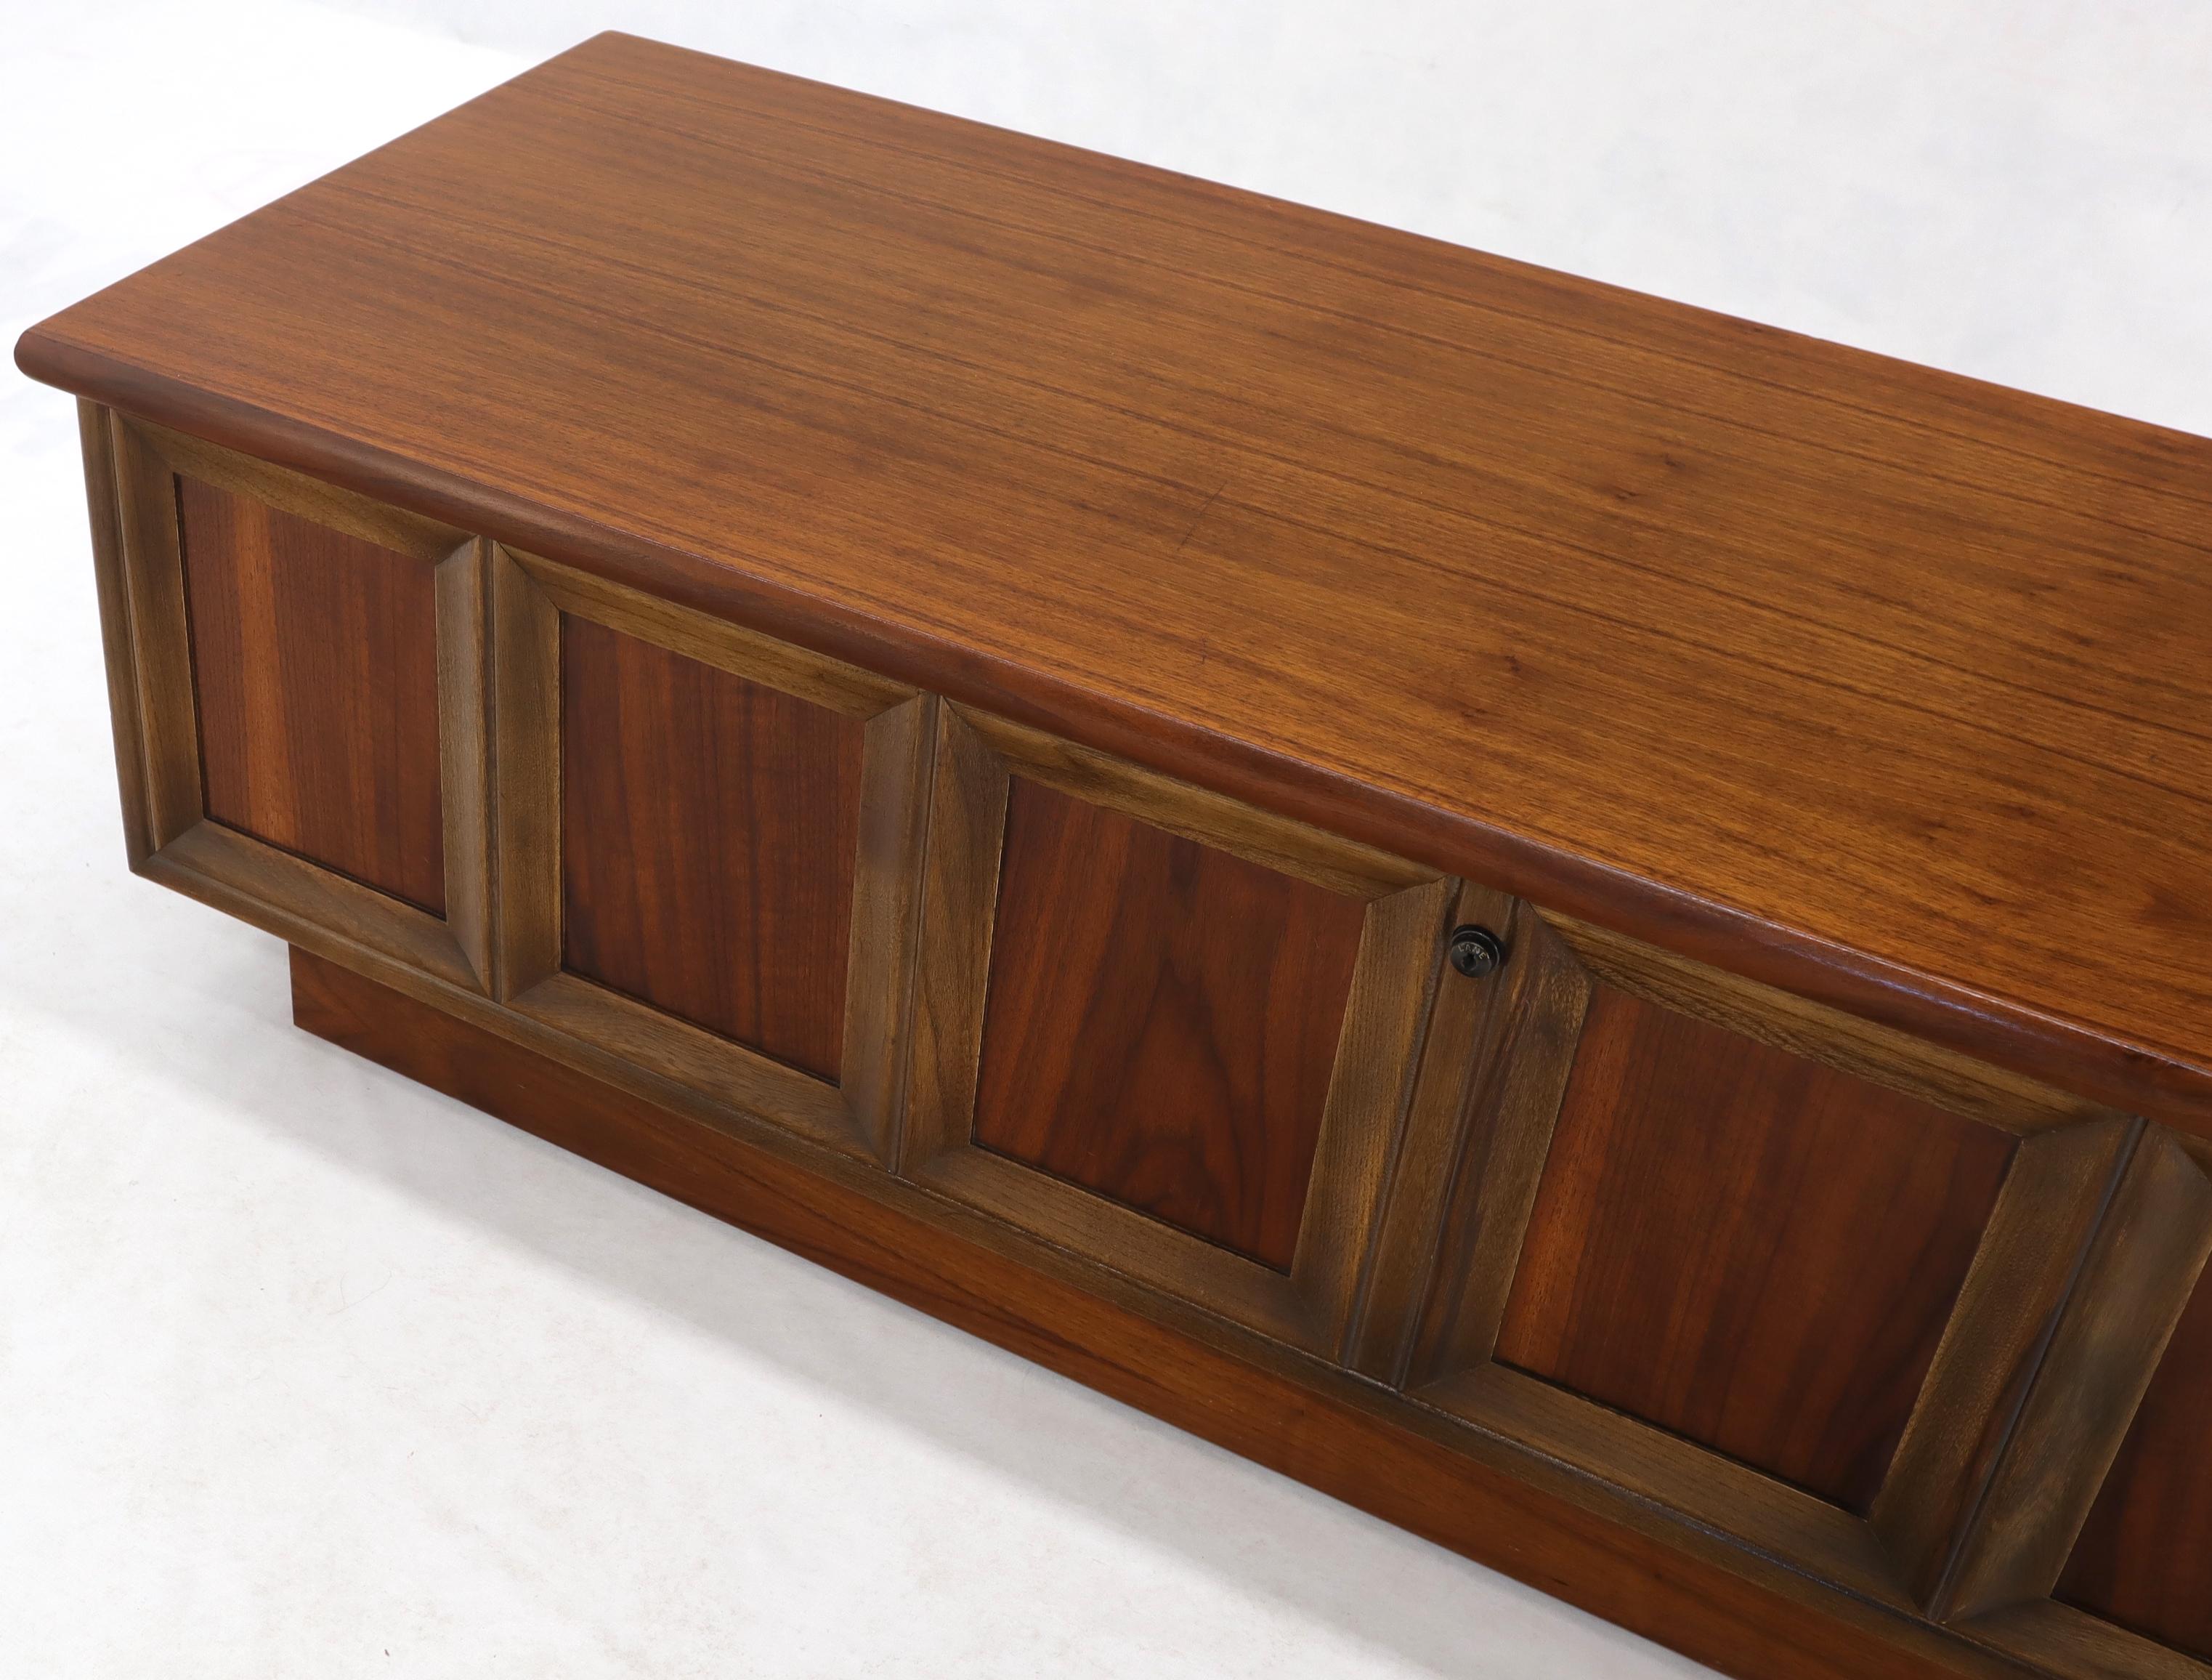 Walnut Cedar Lined Mid-Century Modern Hope Chest by Lane In Excellent Condition For Sale In Rockaway, NJ